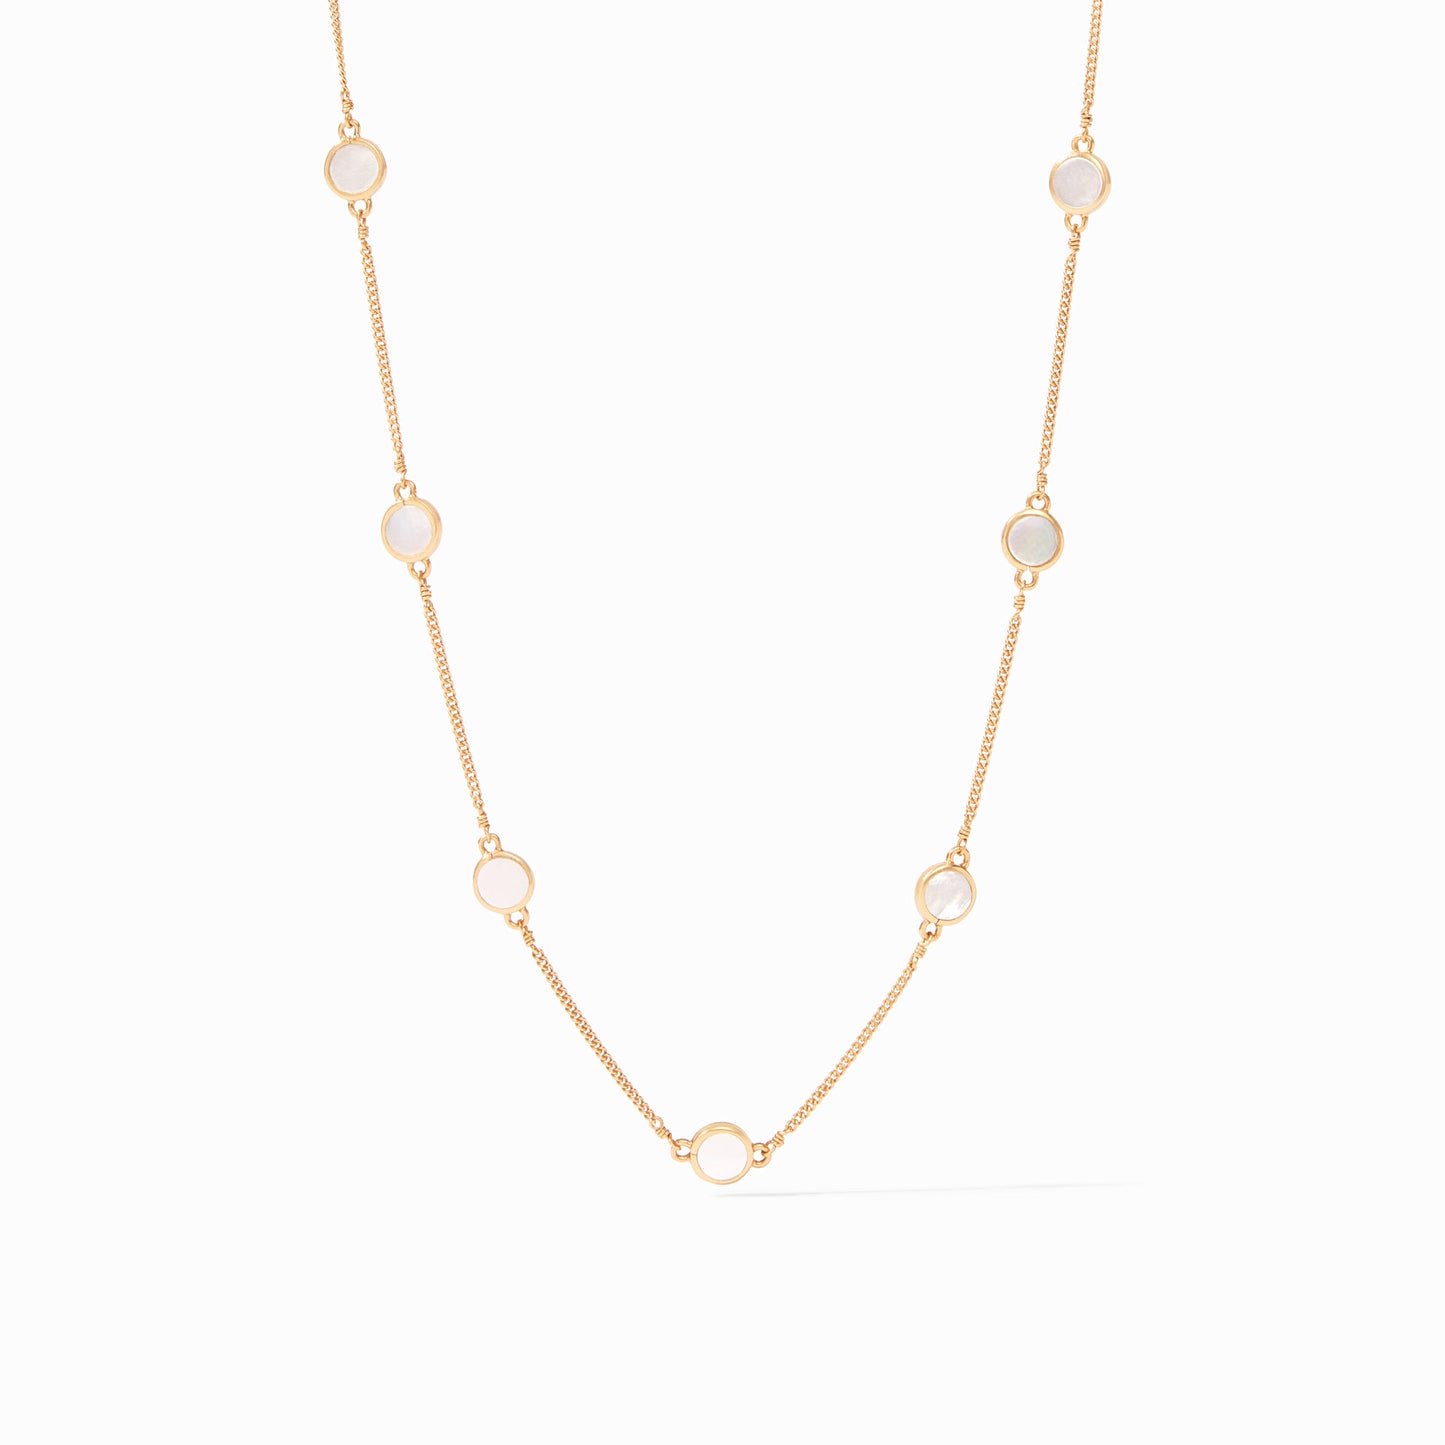 Julie Vos "Valencia" Delicate Station Necklace-Mother of Pearl